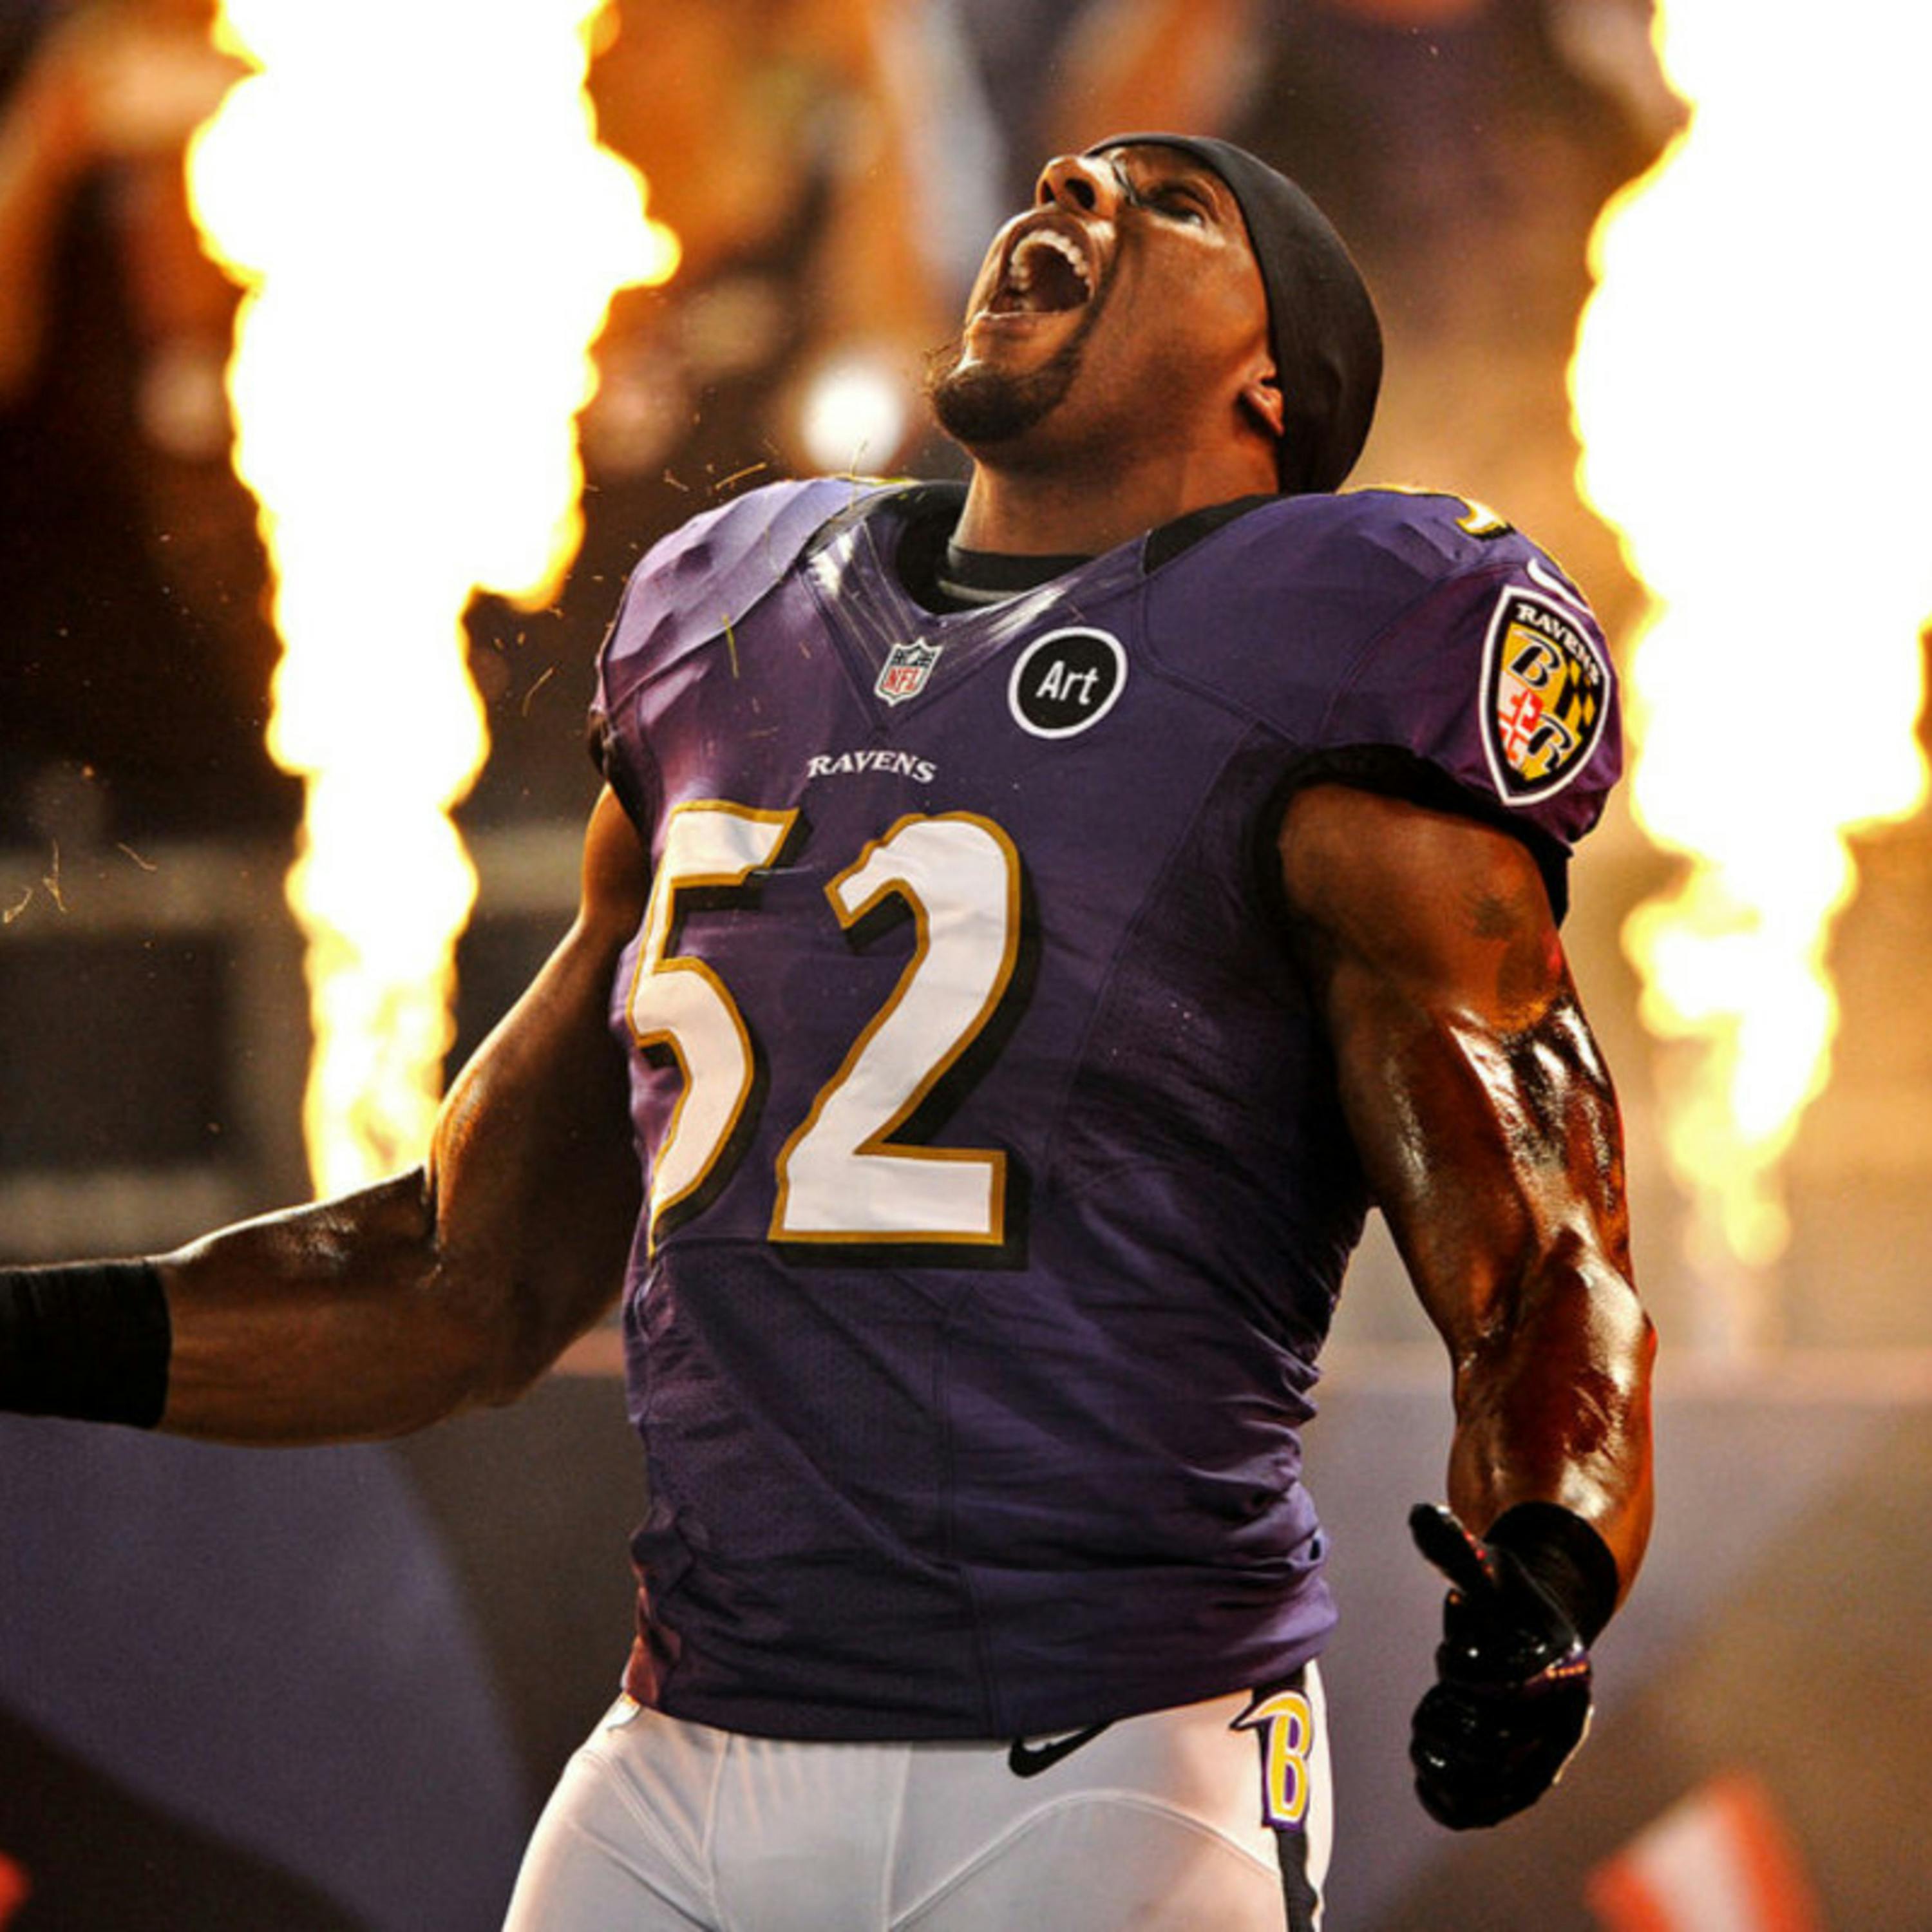 Should Morehouse Hire Baltimore Ravens Great & NFL Hall-Of-Famer Ray Lewis As Head Coach?